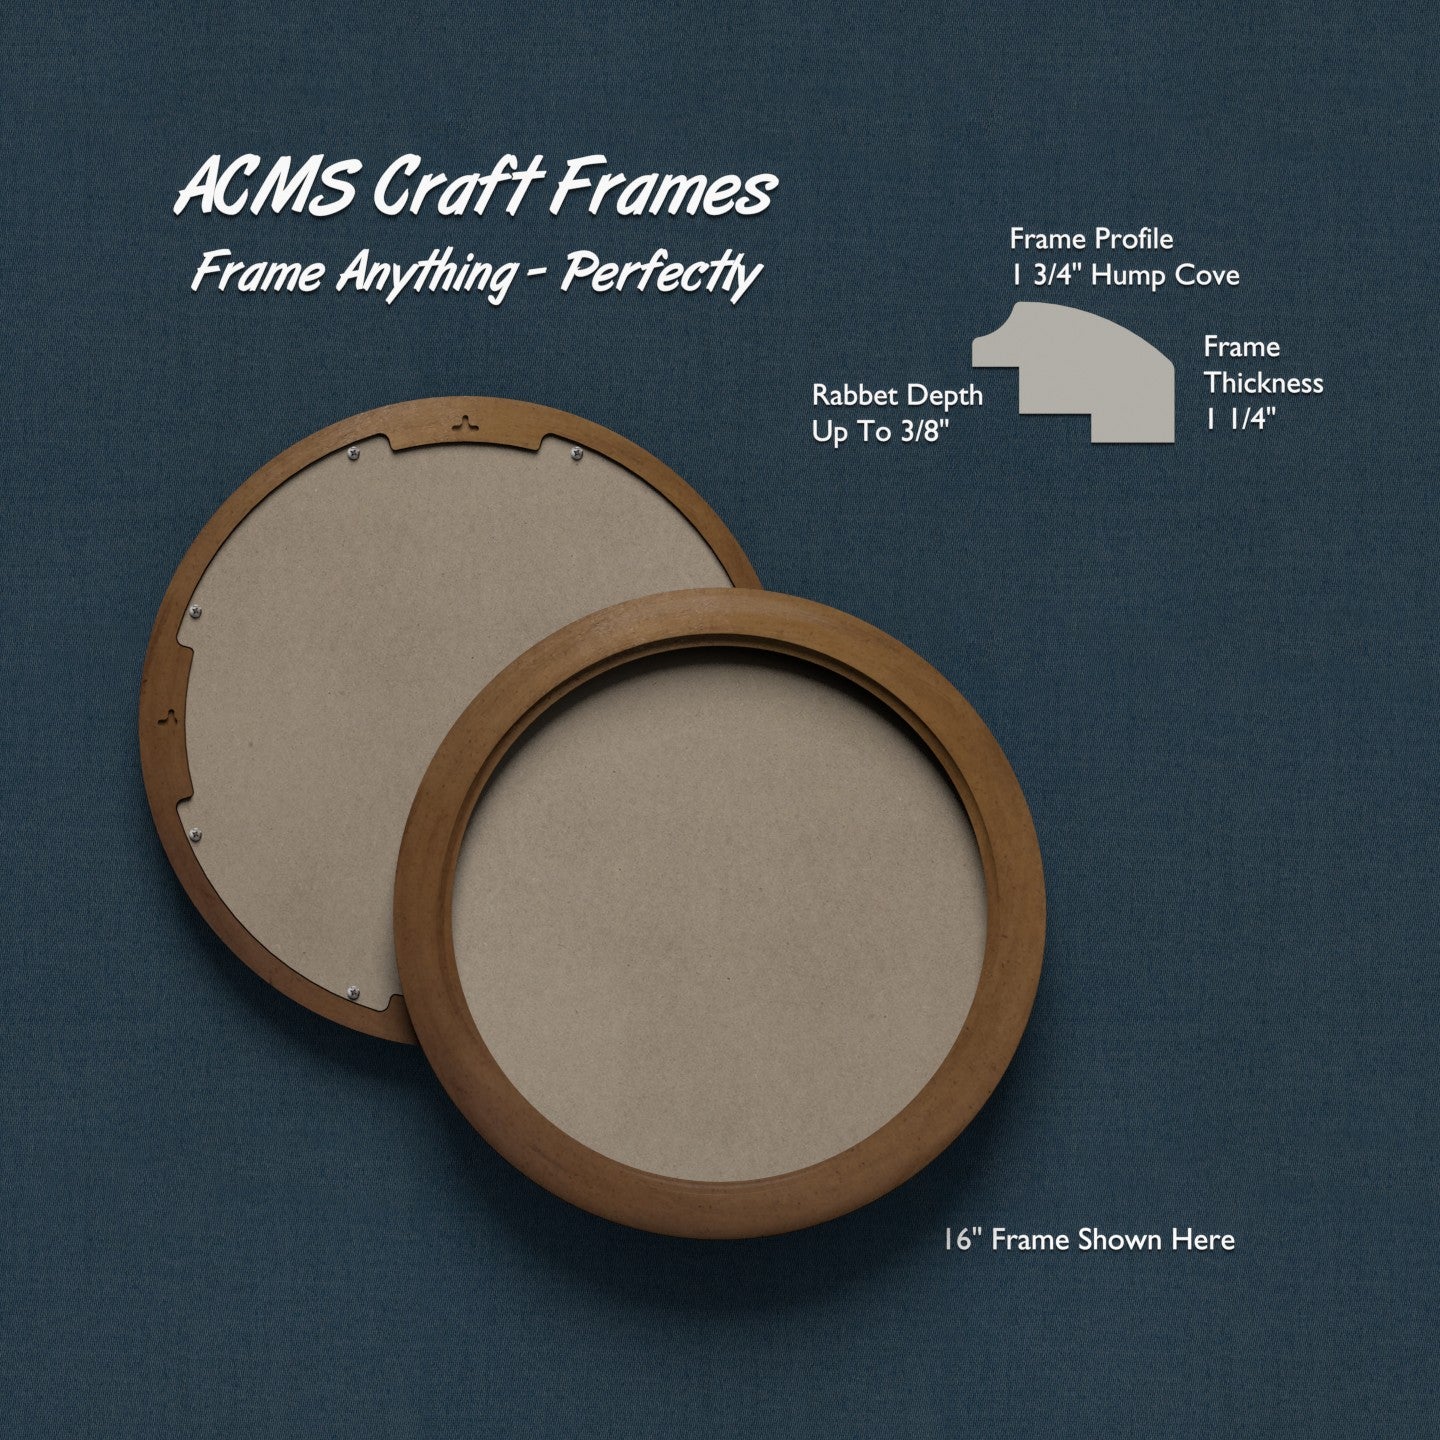 Round Craft Frame - 1 1/4" Thick - 1 3/4" HUMP COVE Profile